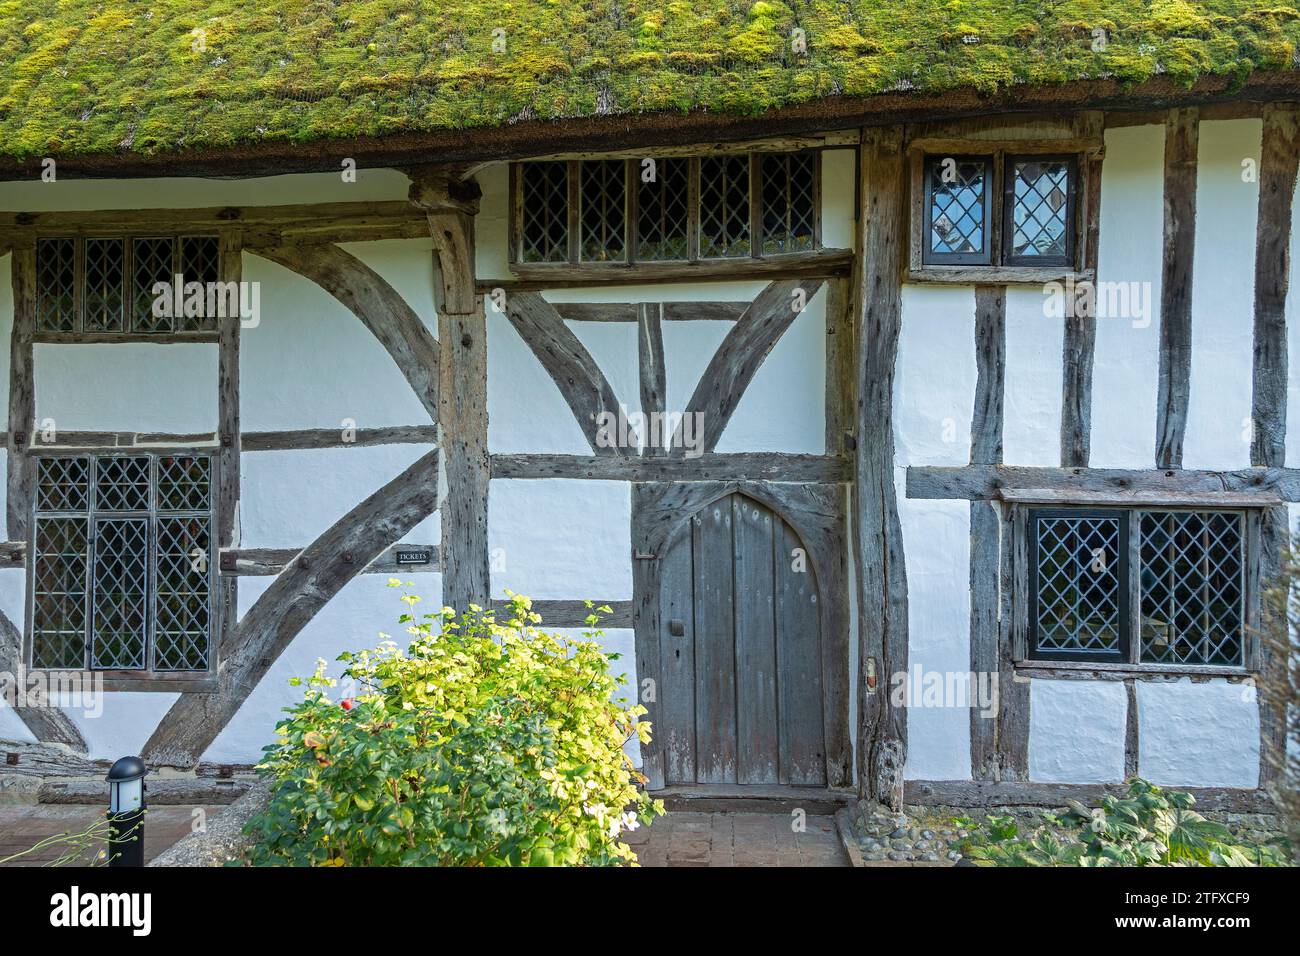 Former Clergy House, the first building the National Trust saved for the Nation in 1896, Alfriston, East Sussex, England, Great Britain Stock Photo